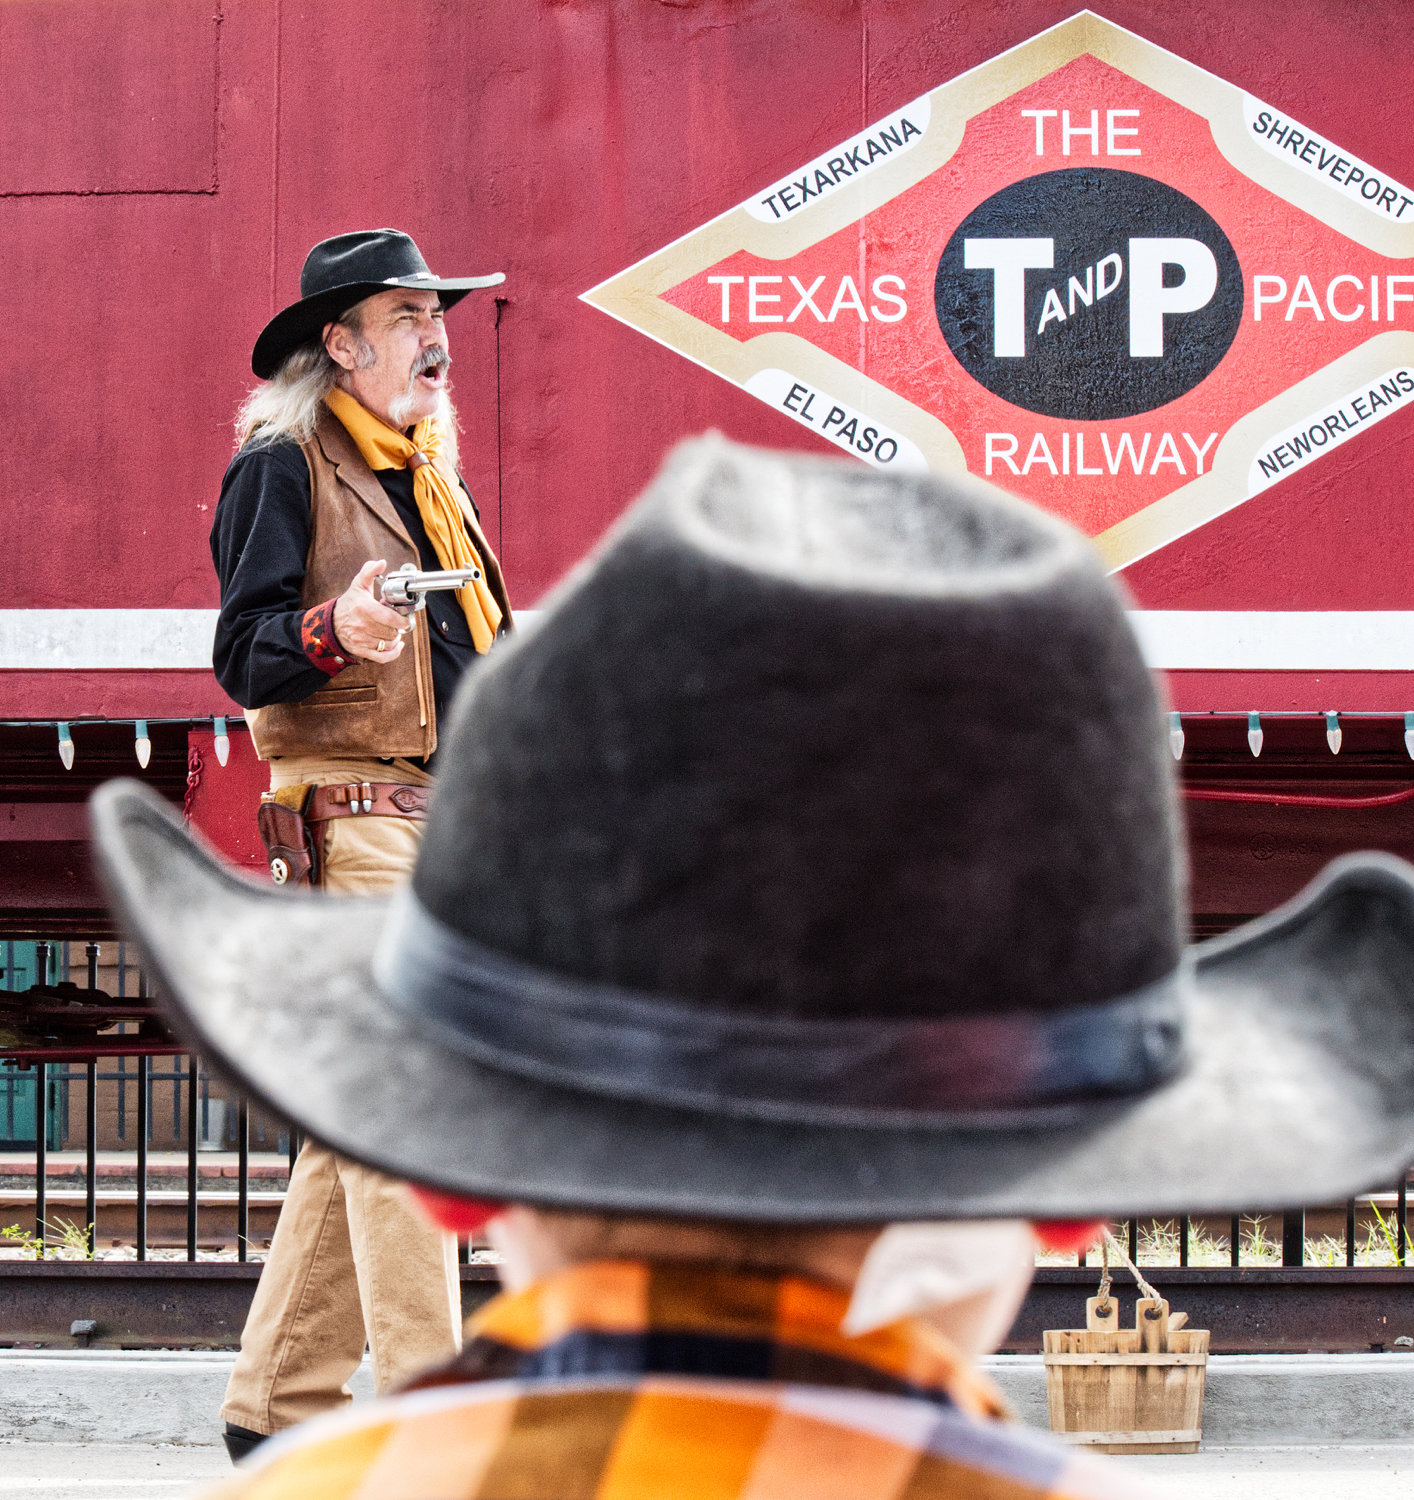 A youngster looks on as the sheriff investigates a train robbery (reenactment).